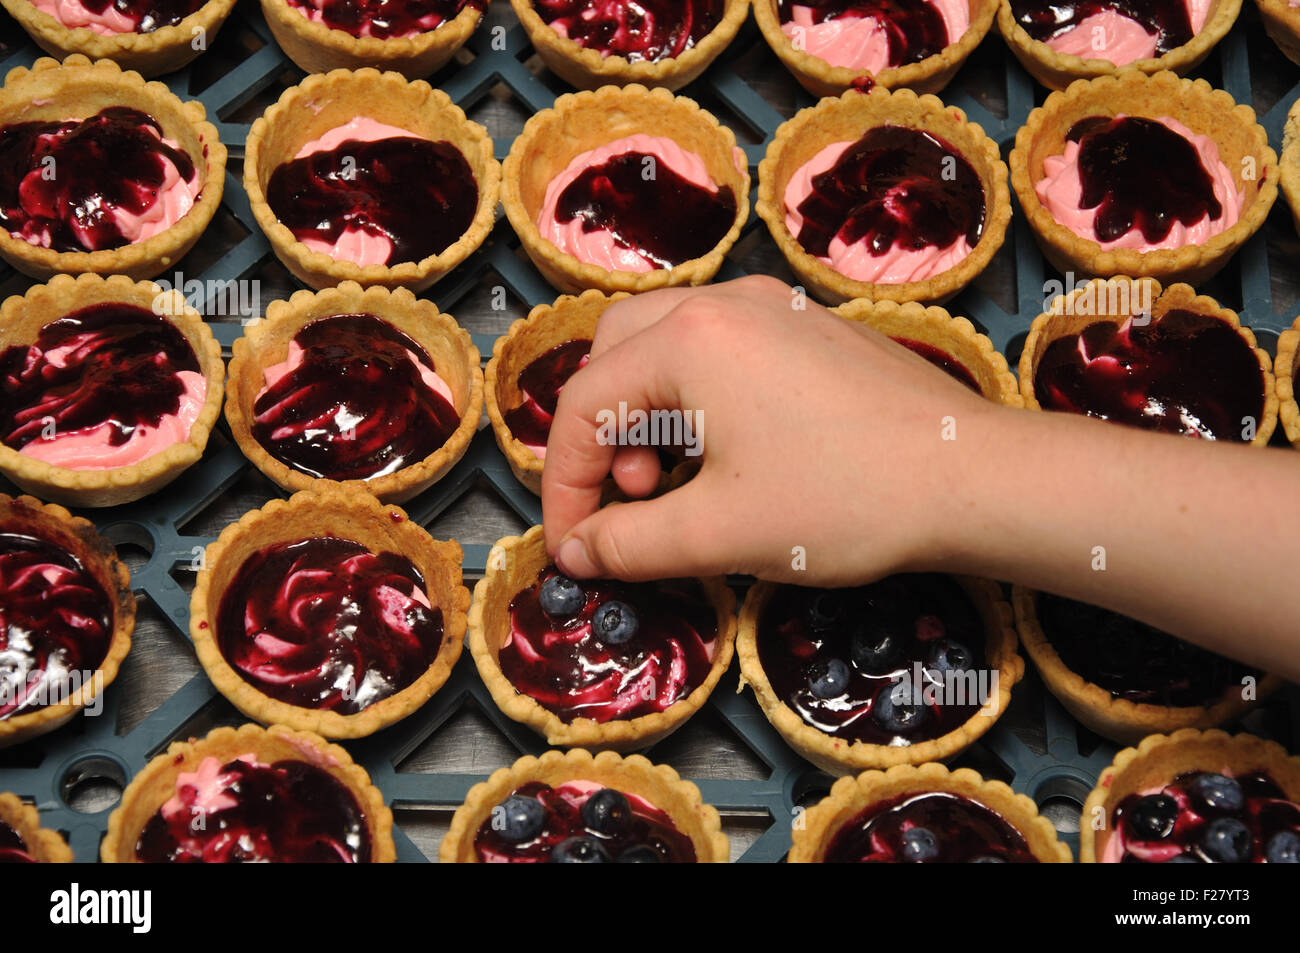 cook adding blueberries to a tray of blueberry tarts Stock Photo